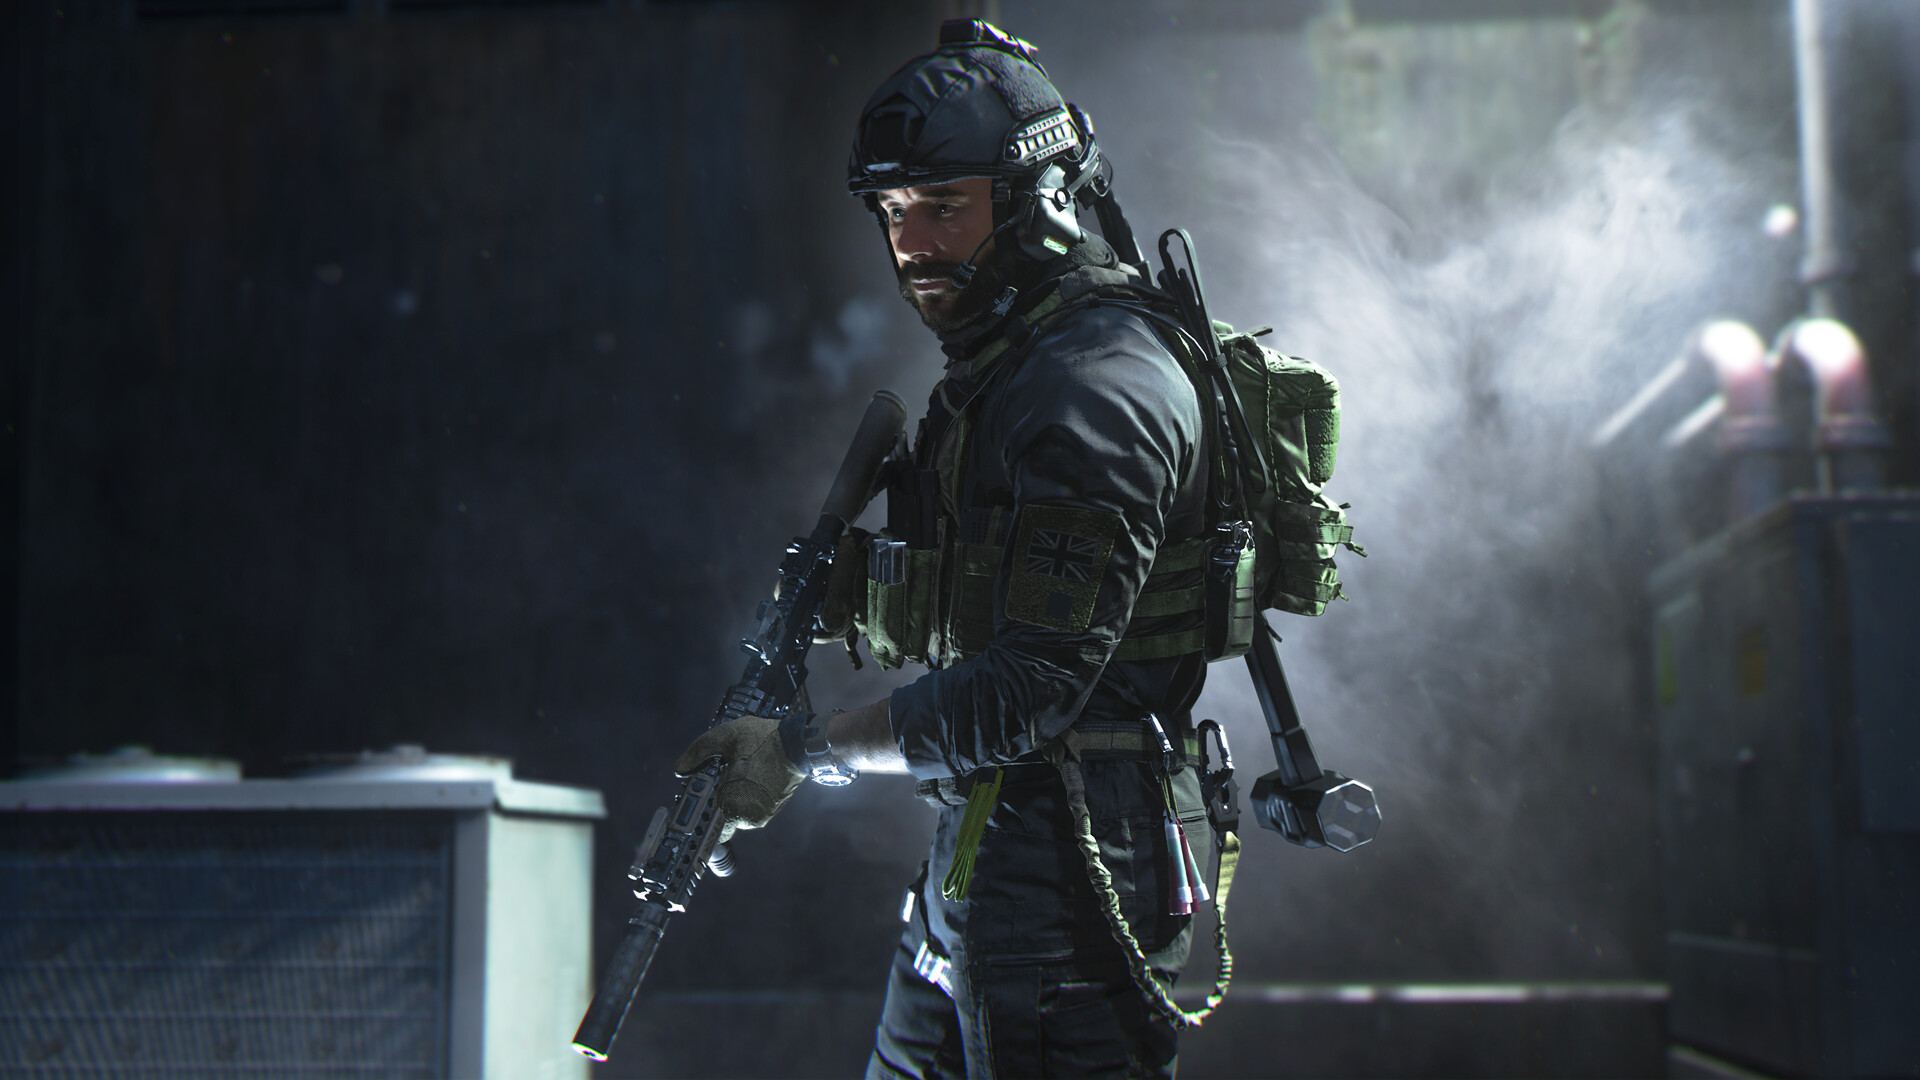 Characters and Voice Actors - Call of Duty: Advanced Warfare 